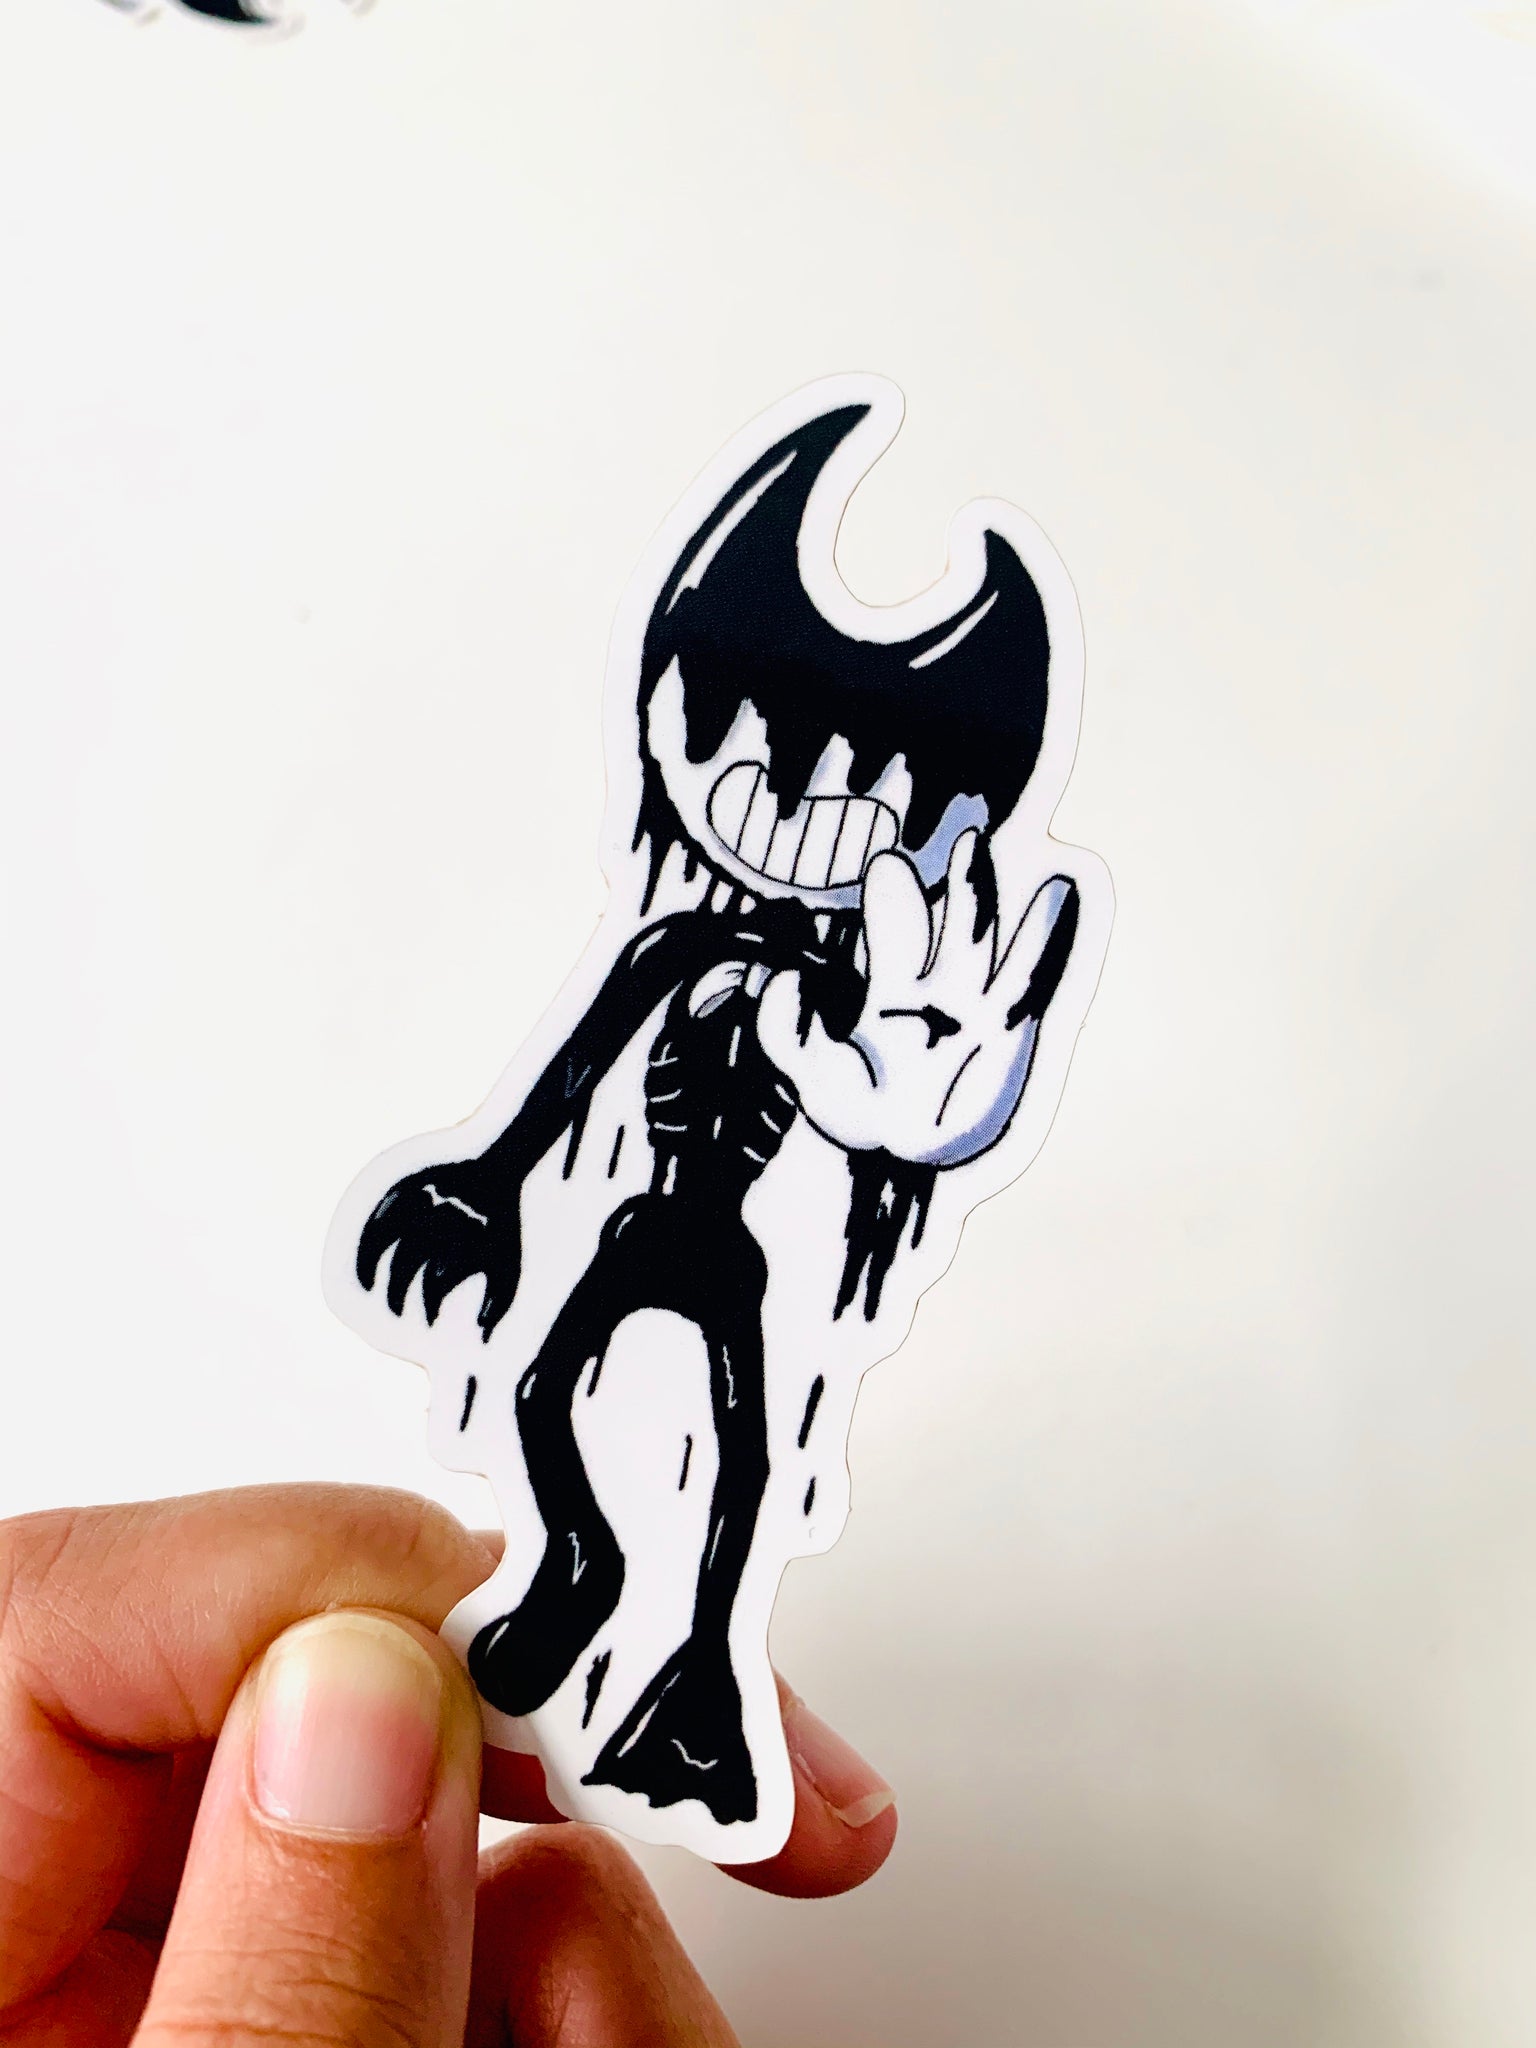 Pin by Tristan on Bendy and the ink machine